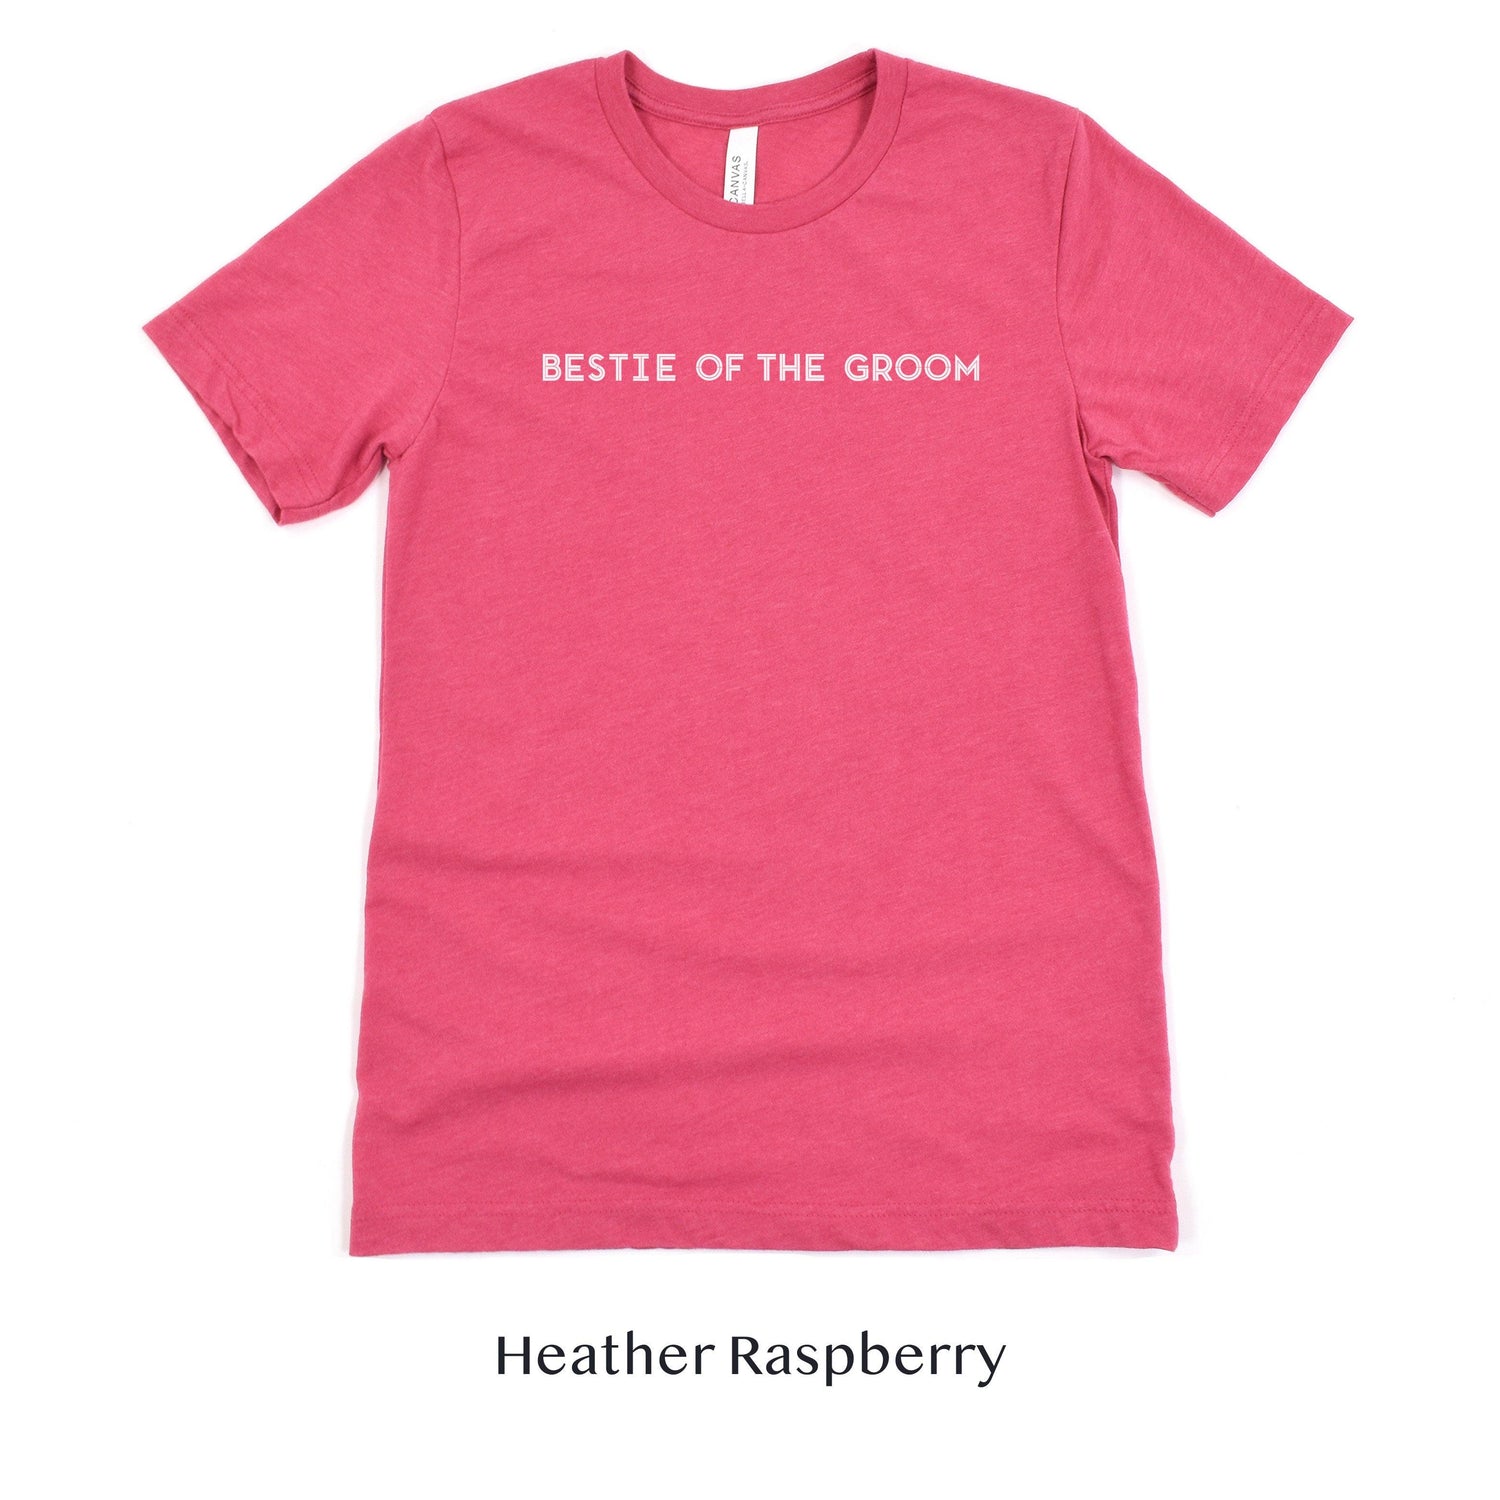 Bestie of the Groom - Unisex t-shirt - Wedding Party Matching Shirts - Bachelor Party by Oaklynn Lane - hot pink raspberry tee